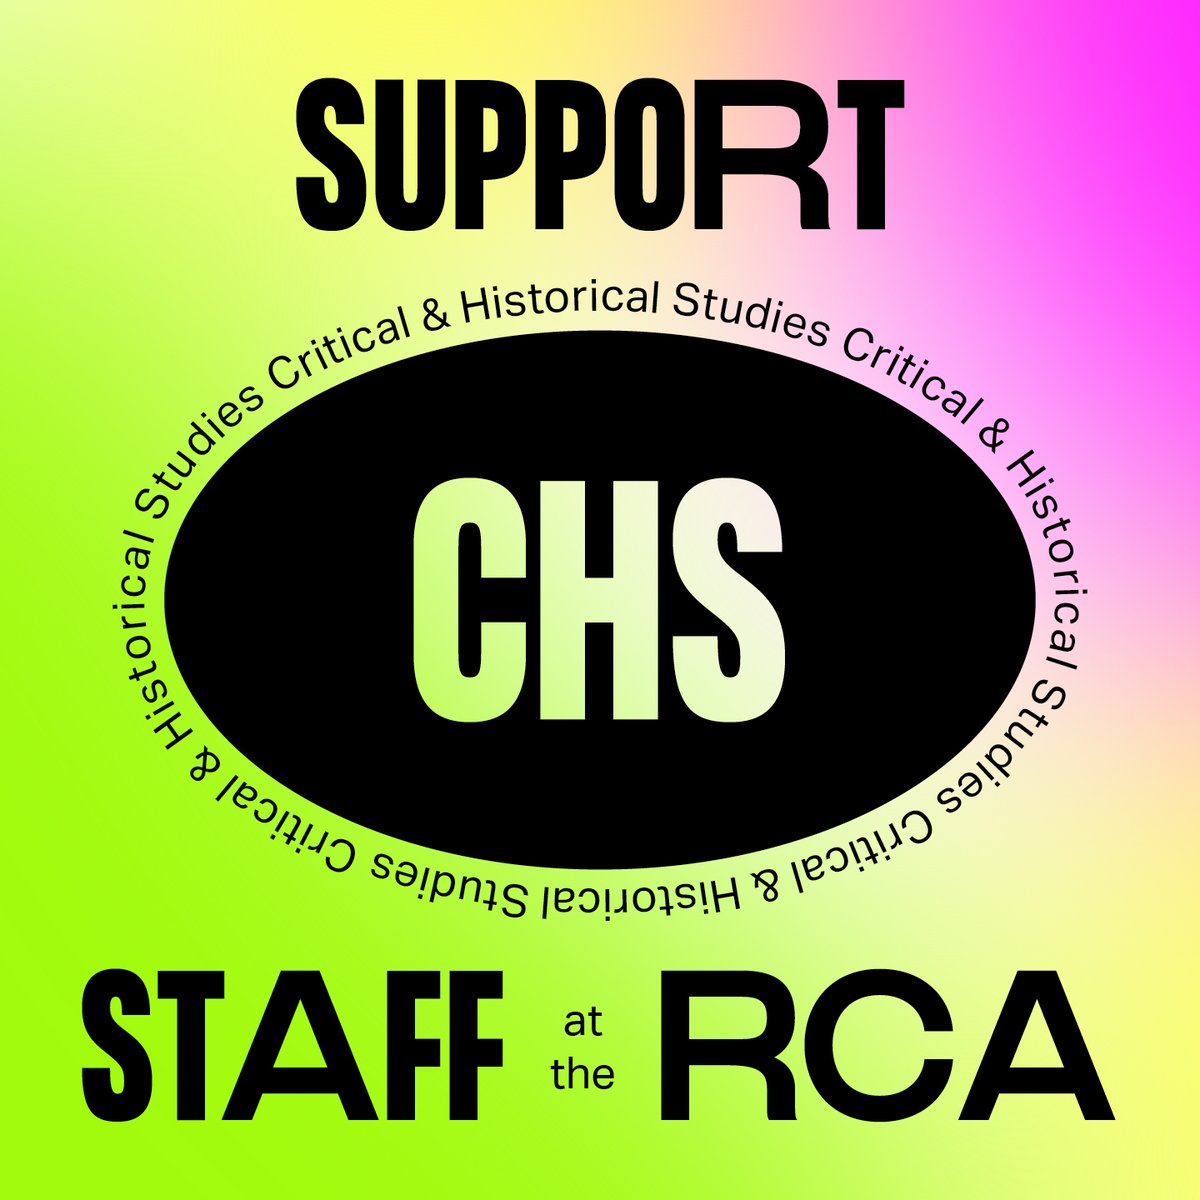 By making all CHS lecturers reapply for their job the @RCA is breaking agreements, union-busting, devaluing critical thinking and disregarding access, equity and inclusion. Please sign & share this letter of support and agree to boycott the RCA #boycottRCA bit.ly/3776TIP